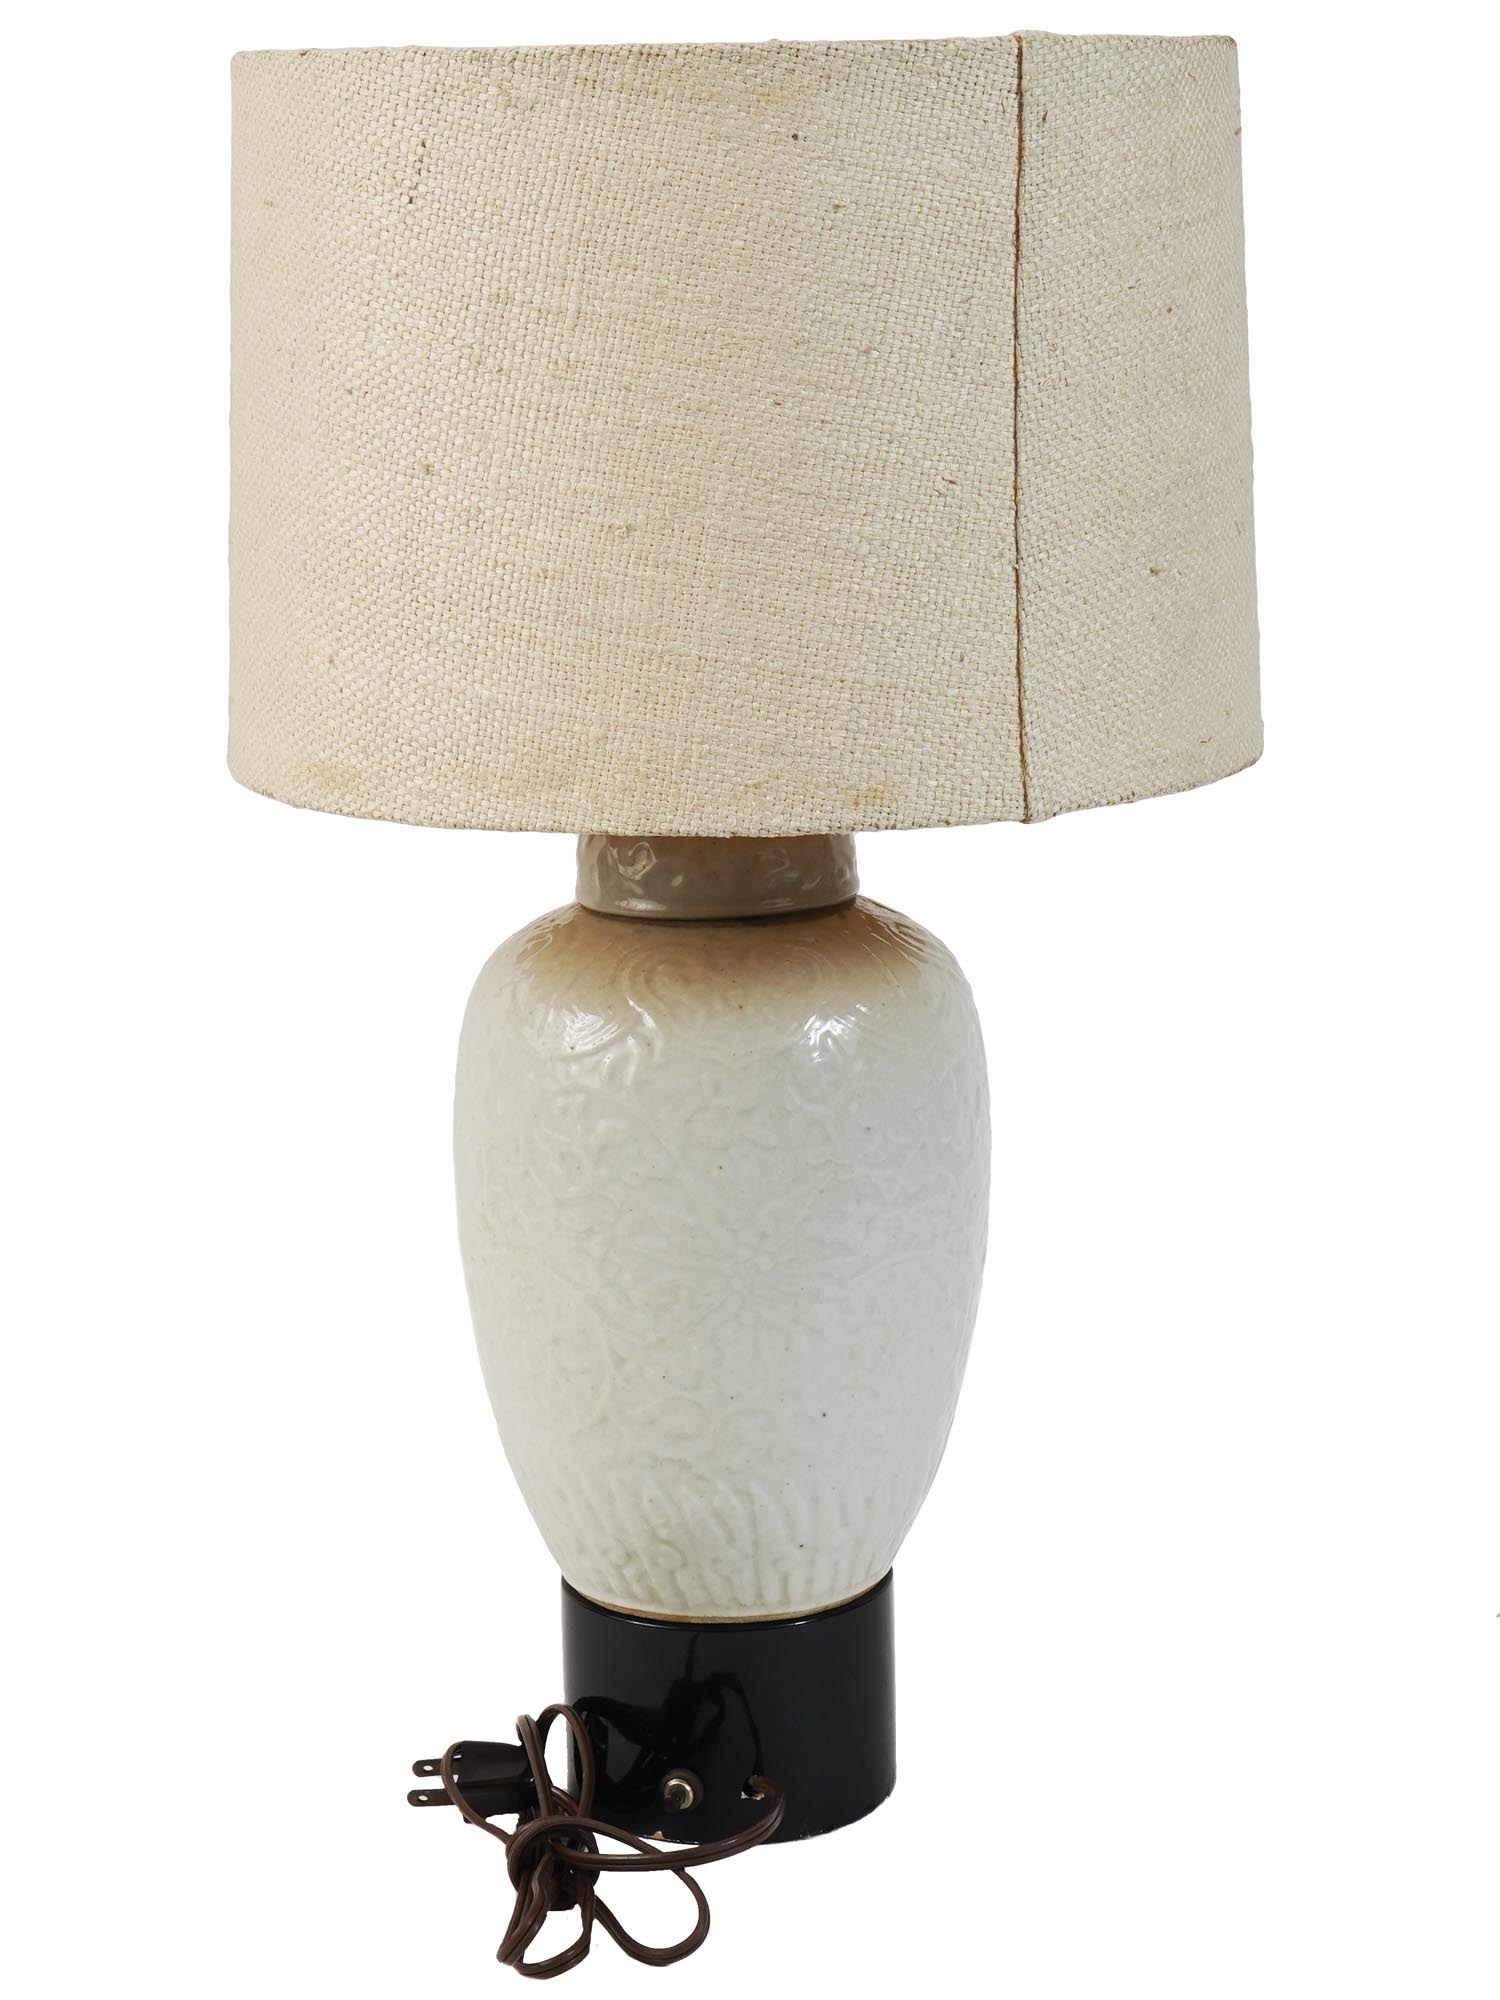 BILLY GANES GLAZED CERAMIC TABLE LAMP WITH SHADE PIC-1